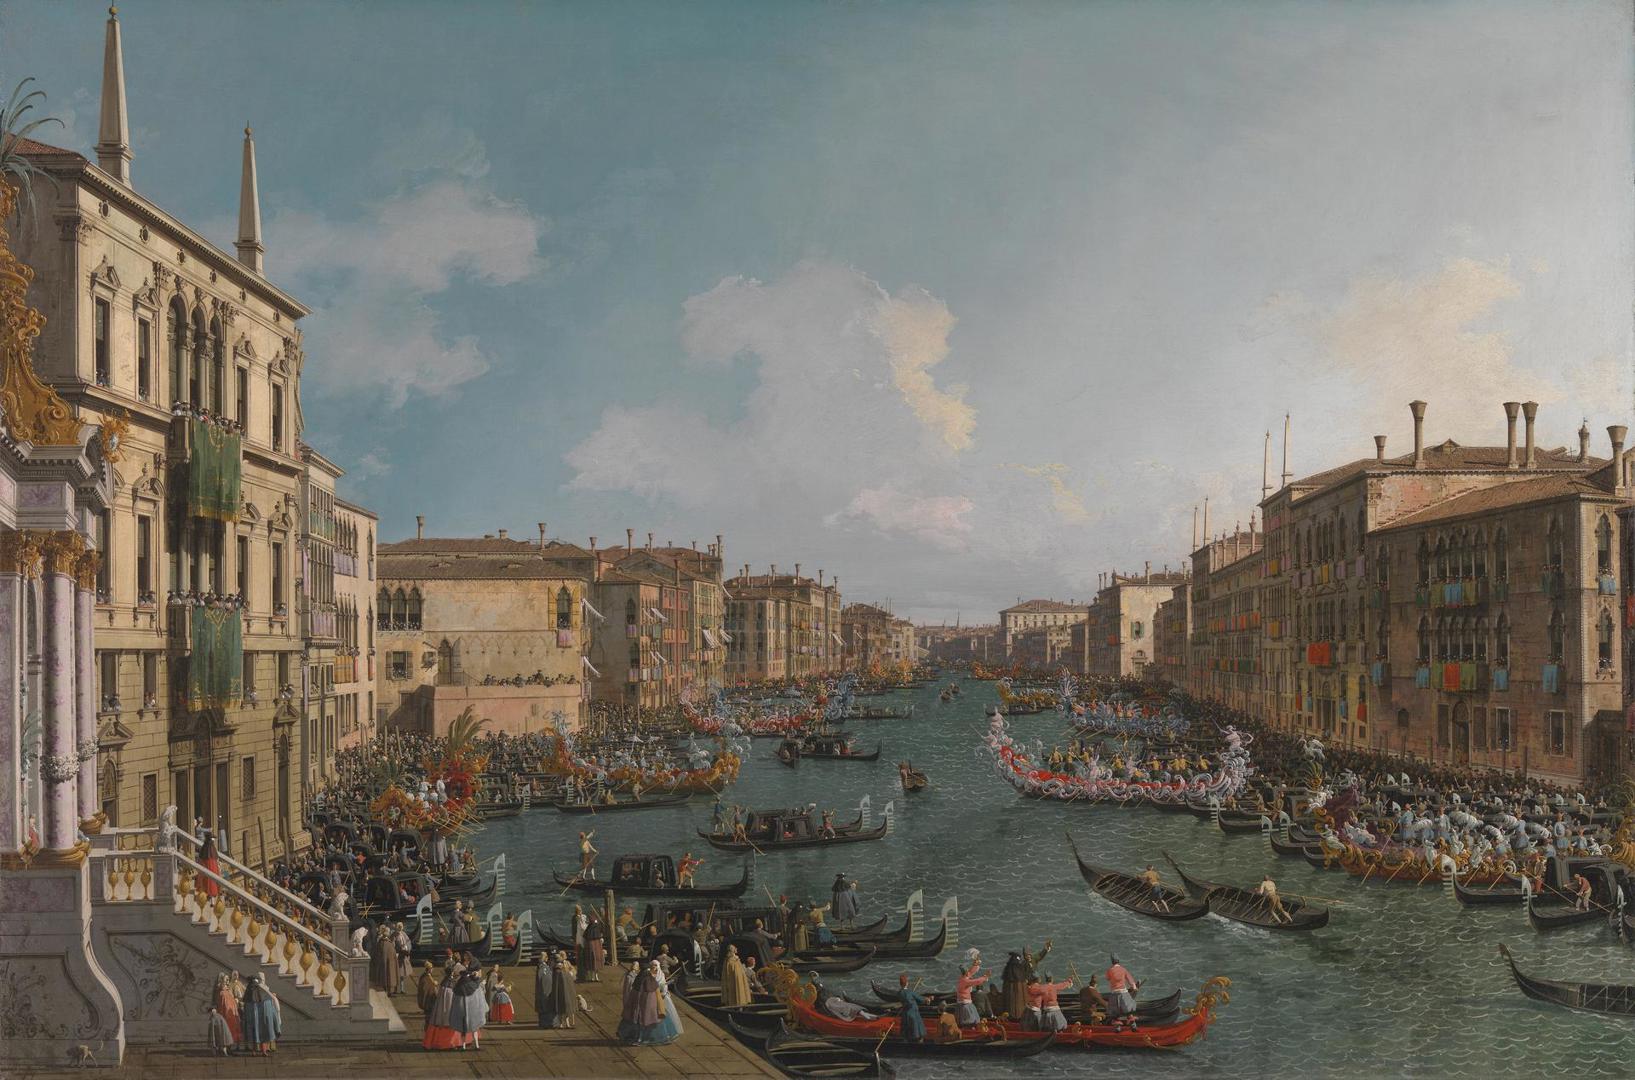 A Regatta on the Grand Canal by Canaletto